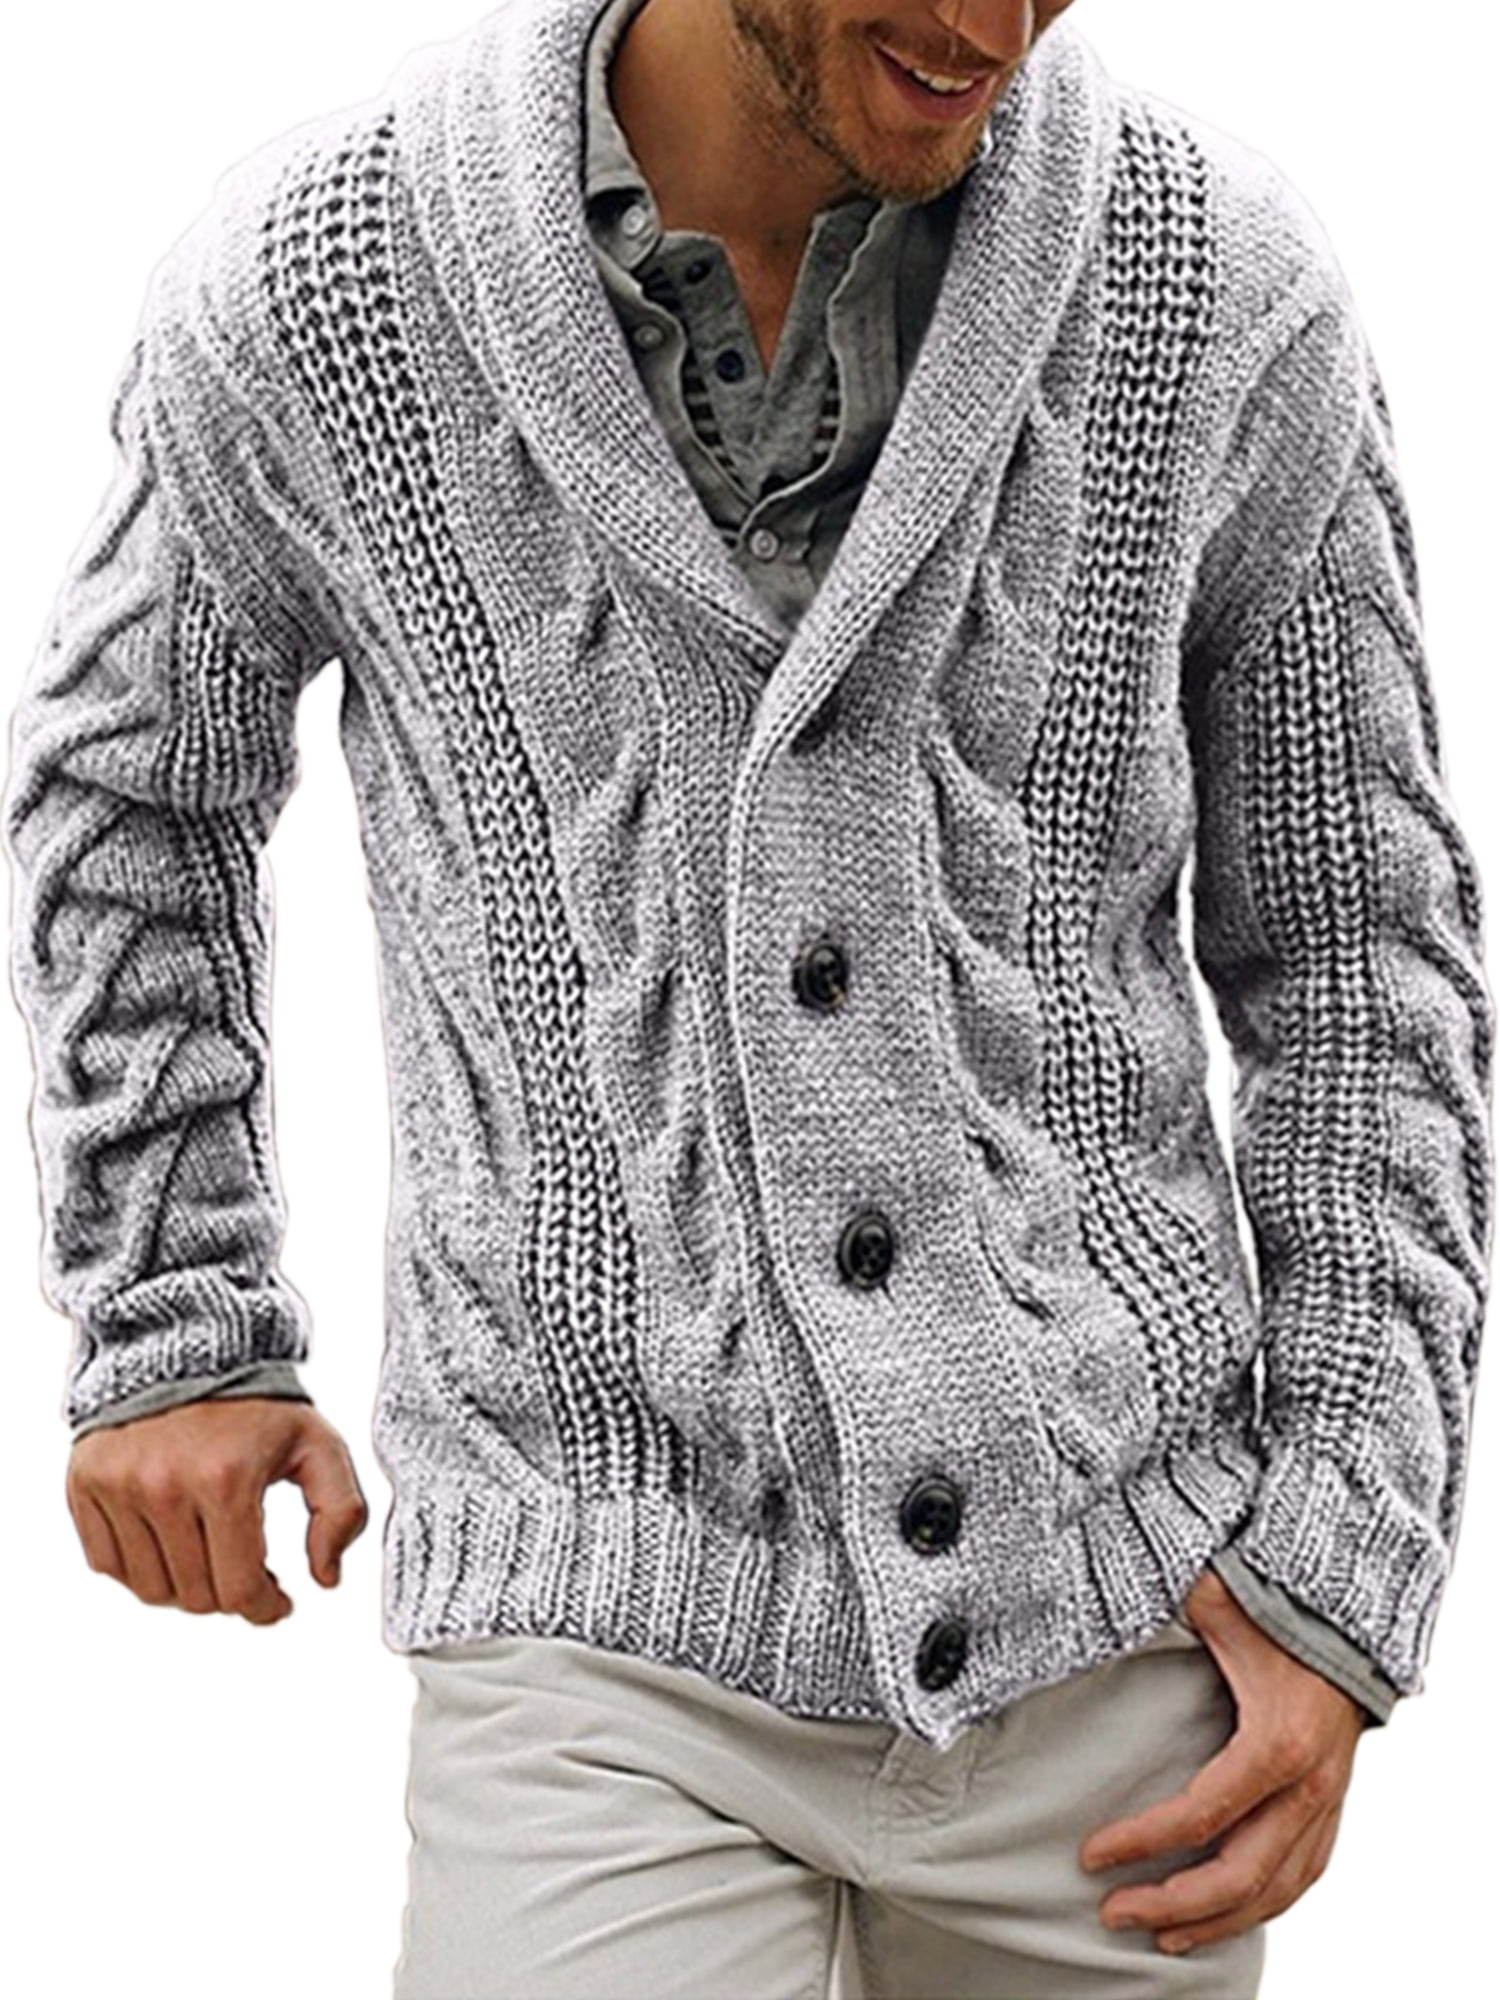 Mens Zip Knitted Cardigan Fleece Knitted Sweater Cardigan Coat Big and Tall